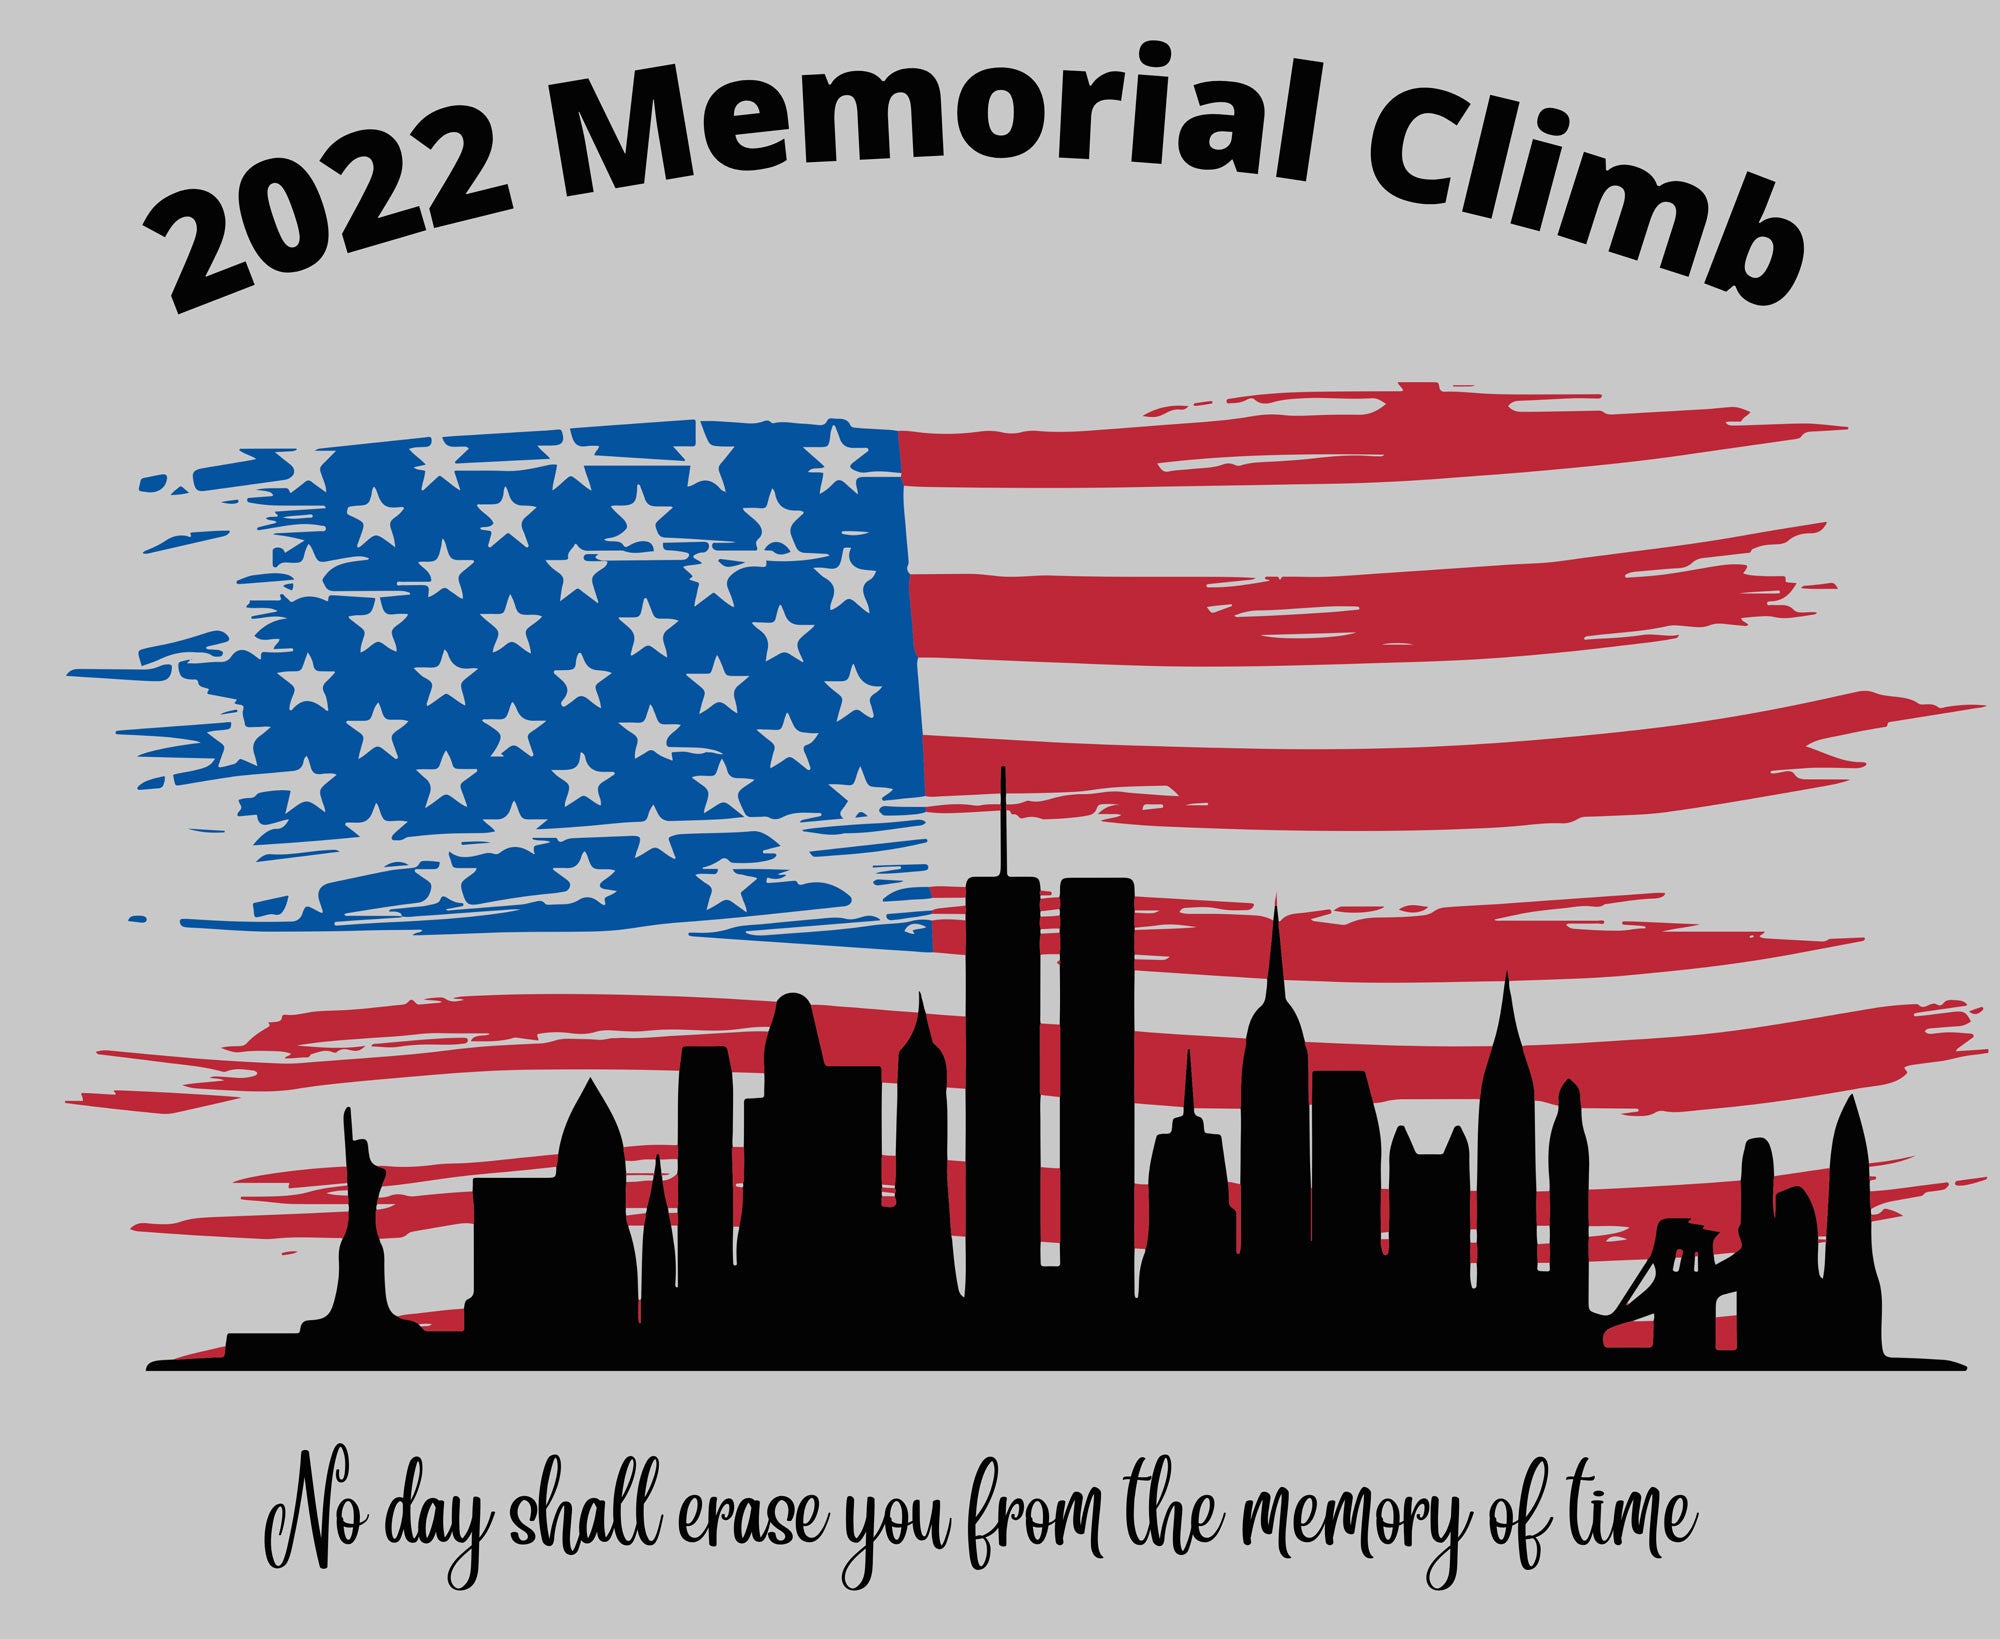 "9/11 Memorial Climb" T-shirt with New York City skyline superimposed on U.S. flag, with caption that reads: "No day shall erase you from the memory of time"